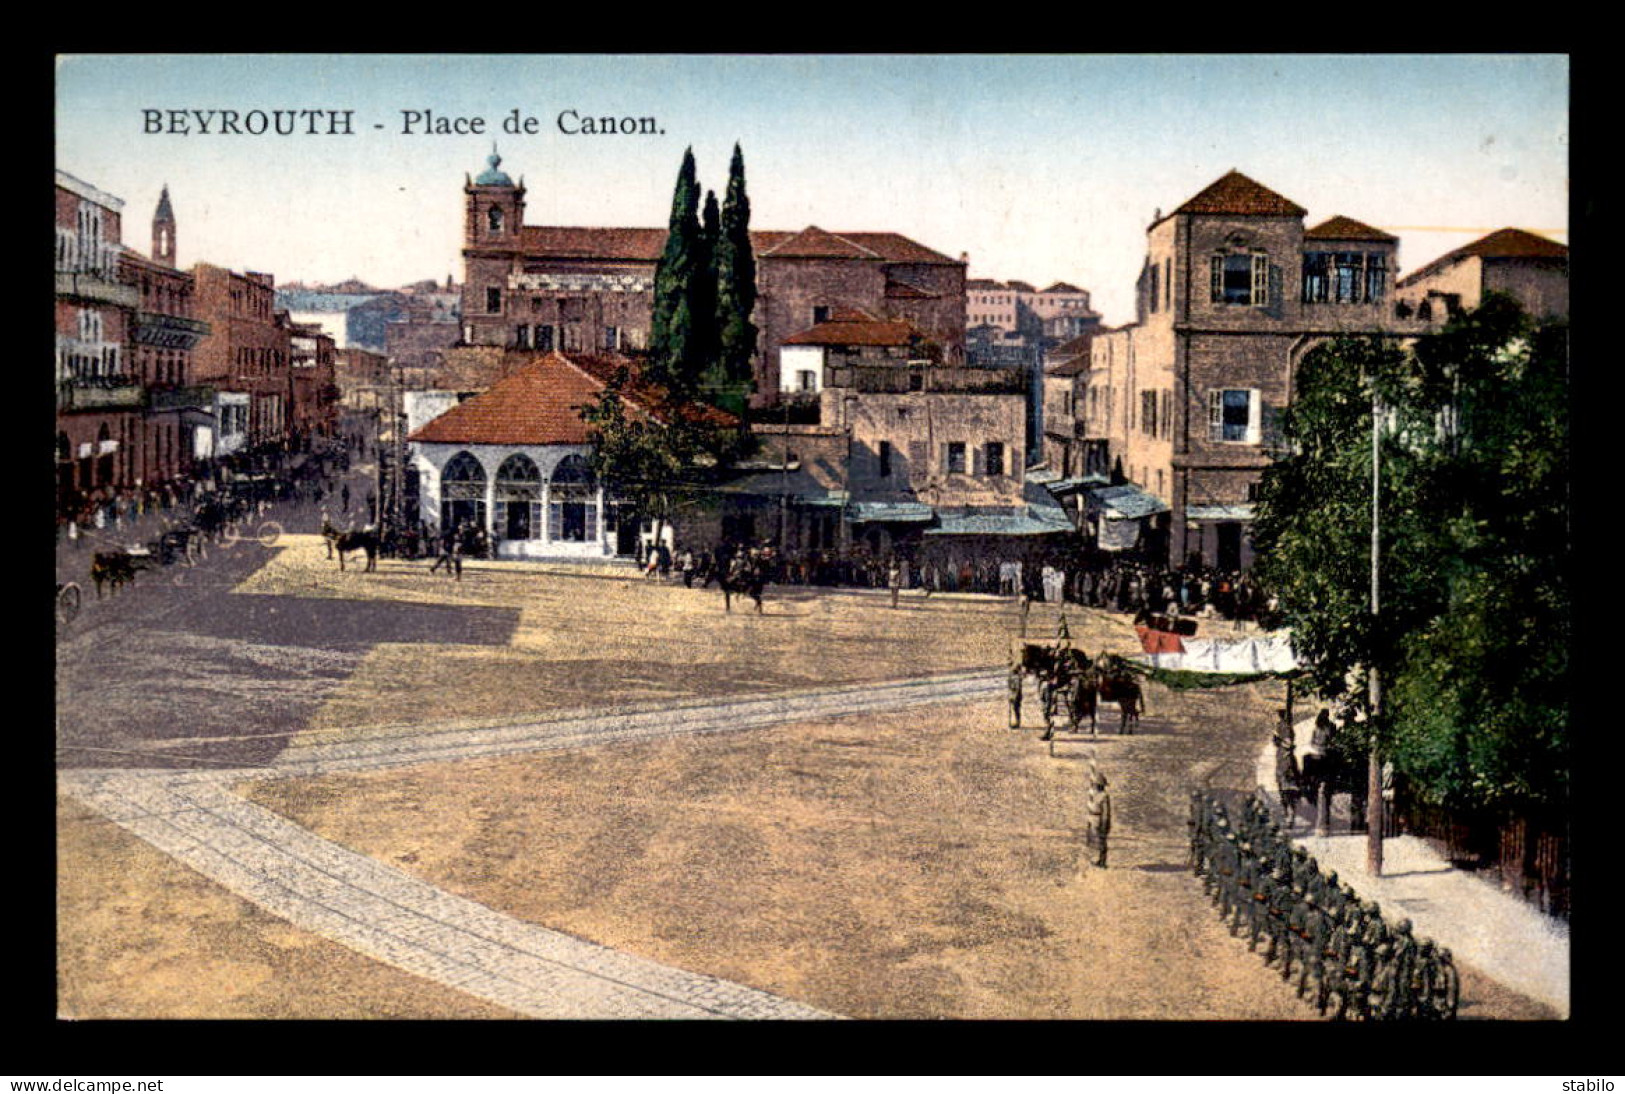 LIBAN - BEYROUTH - PLACE DES CANONS - CARTE COLORISEE - Liban